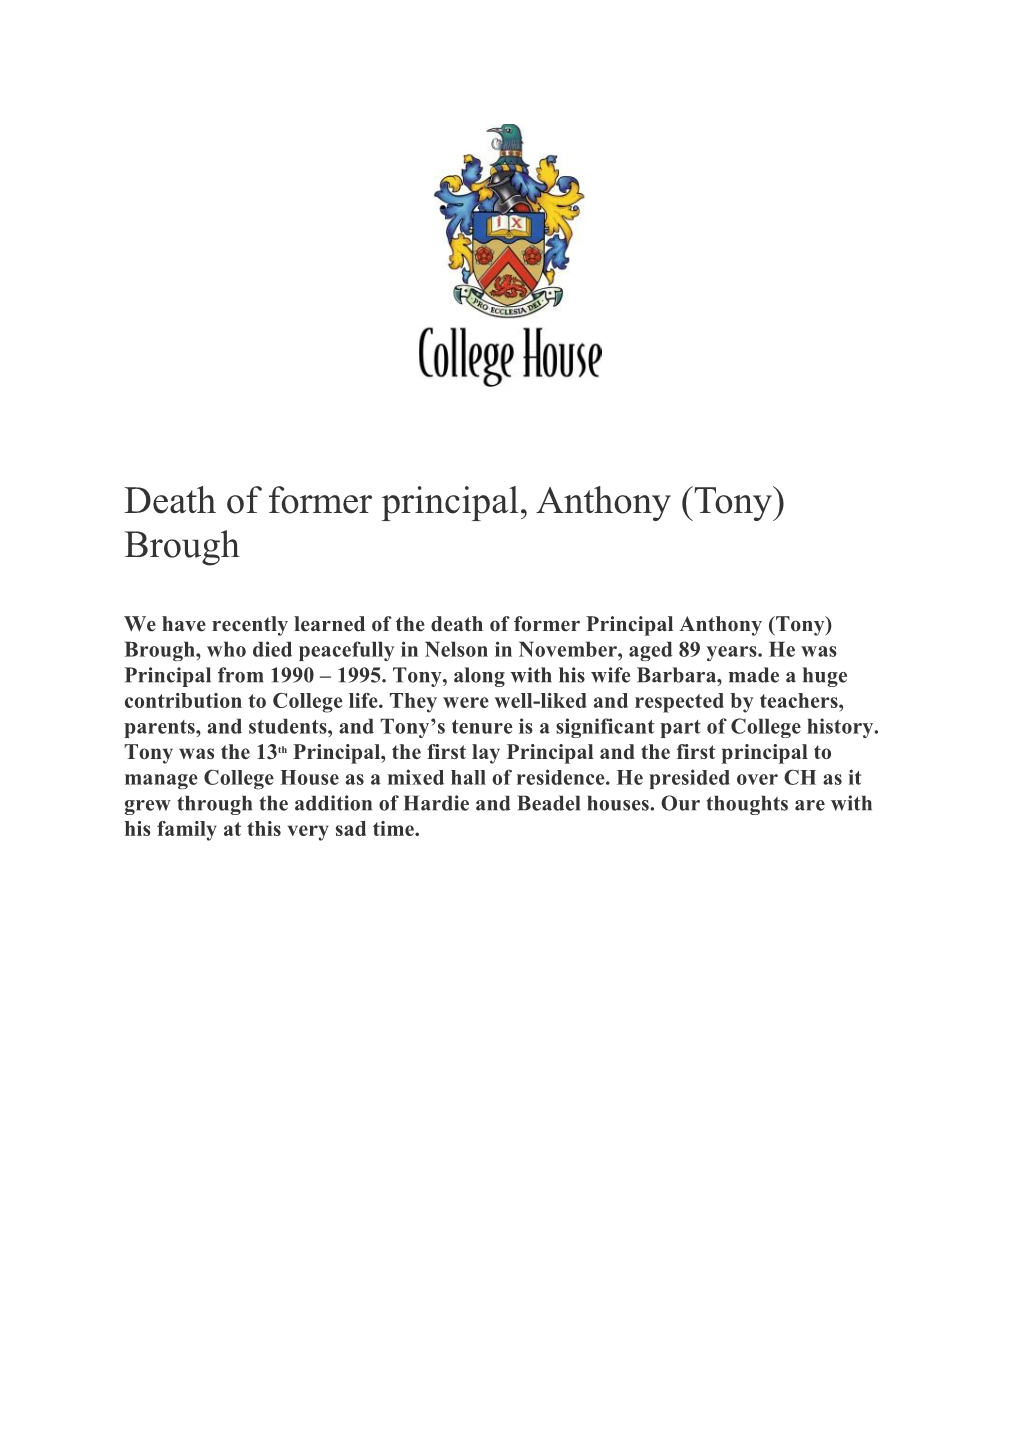 Death of Former Principal, Anthony (Tony) Brough